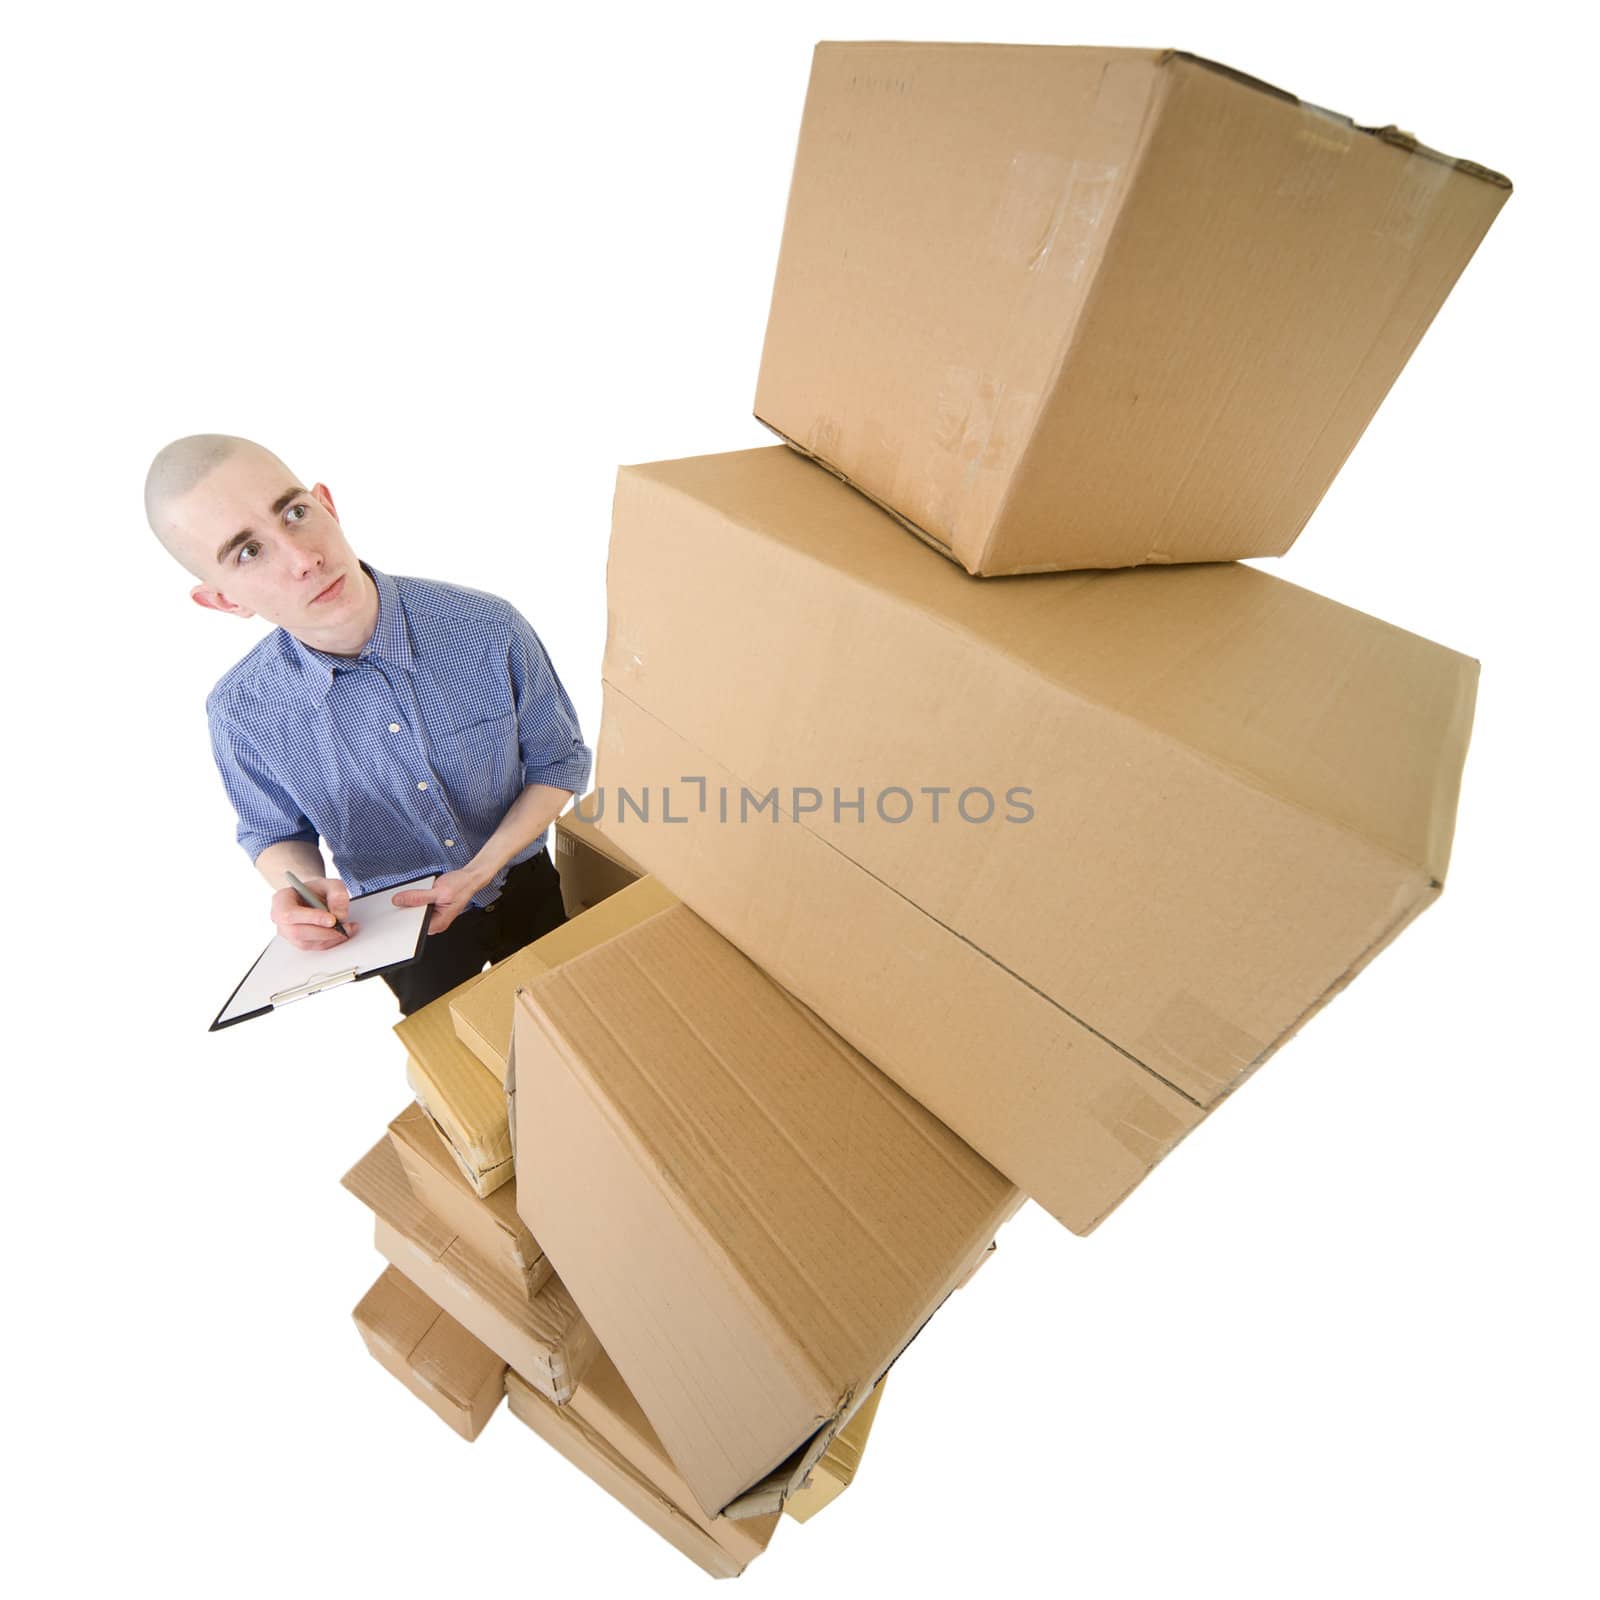 Man and pile cardboard boxes by pzaxe